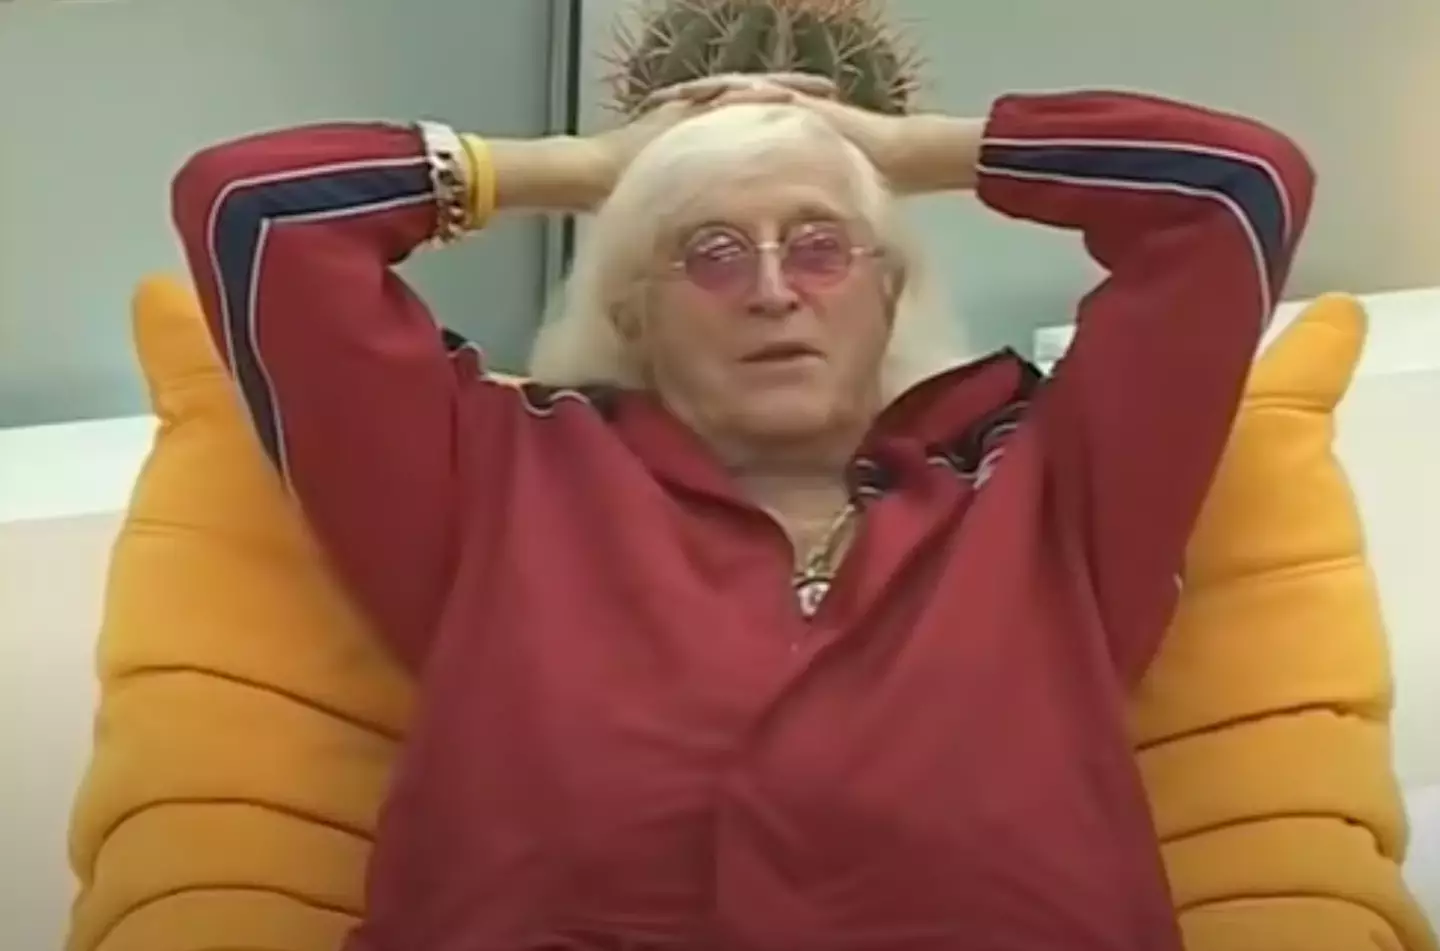 Jimmy Savile had been displaying odd and inappropriate behaviour for years. (Channel 4)